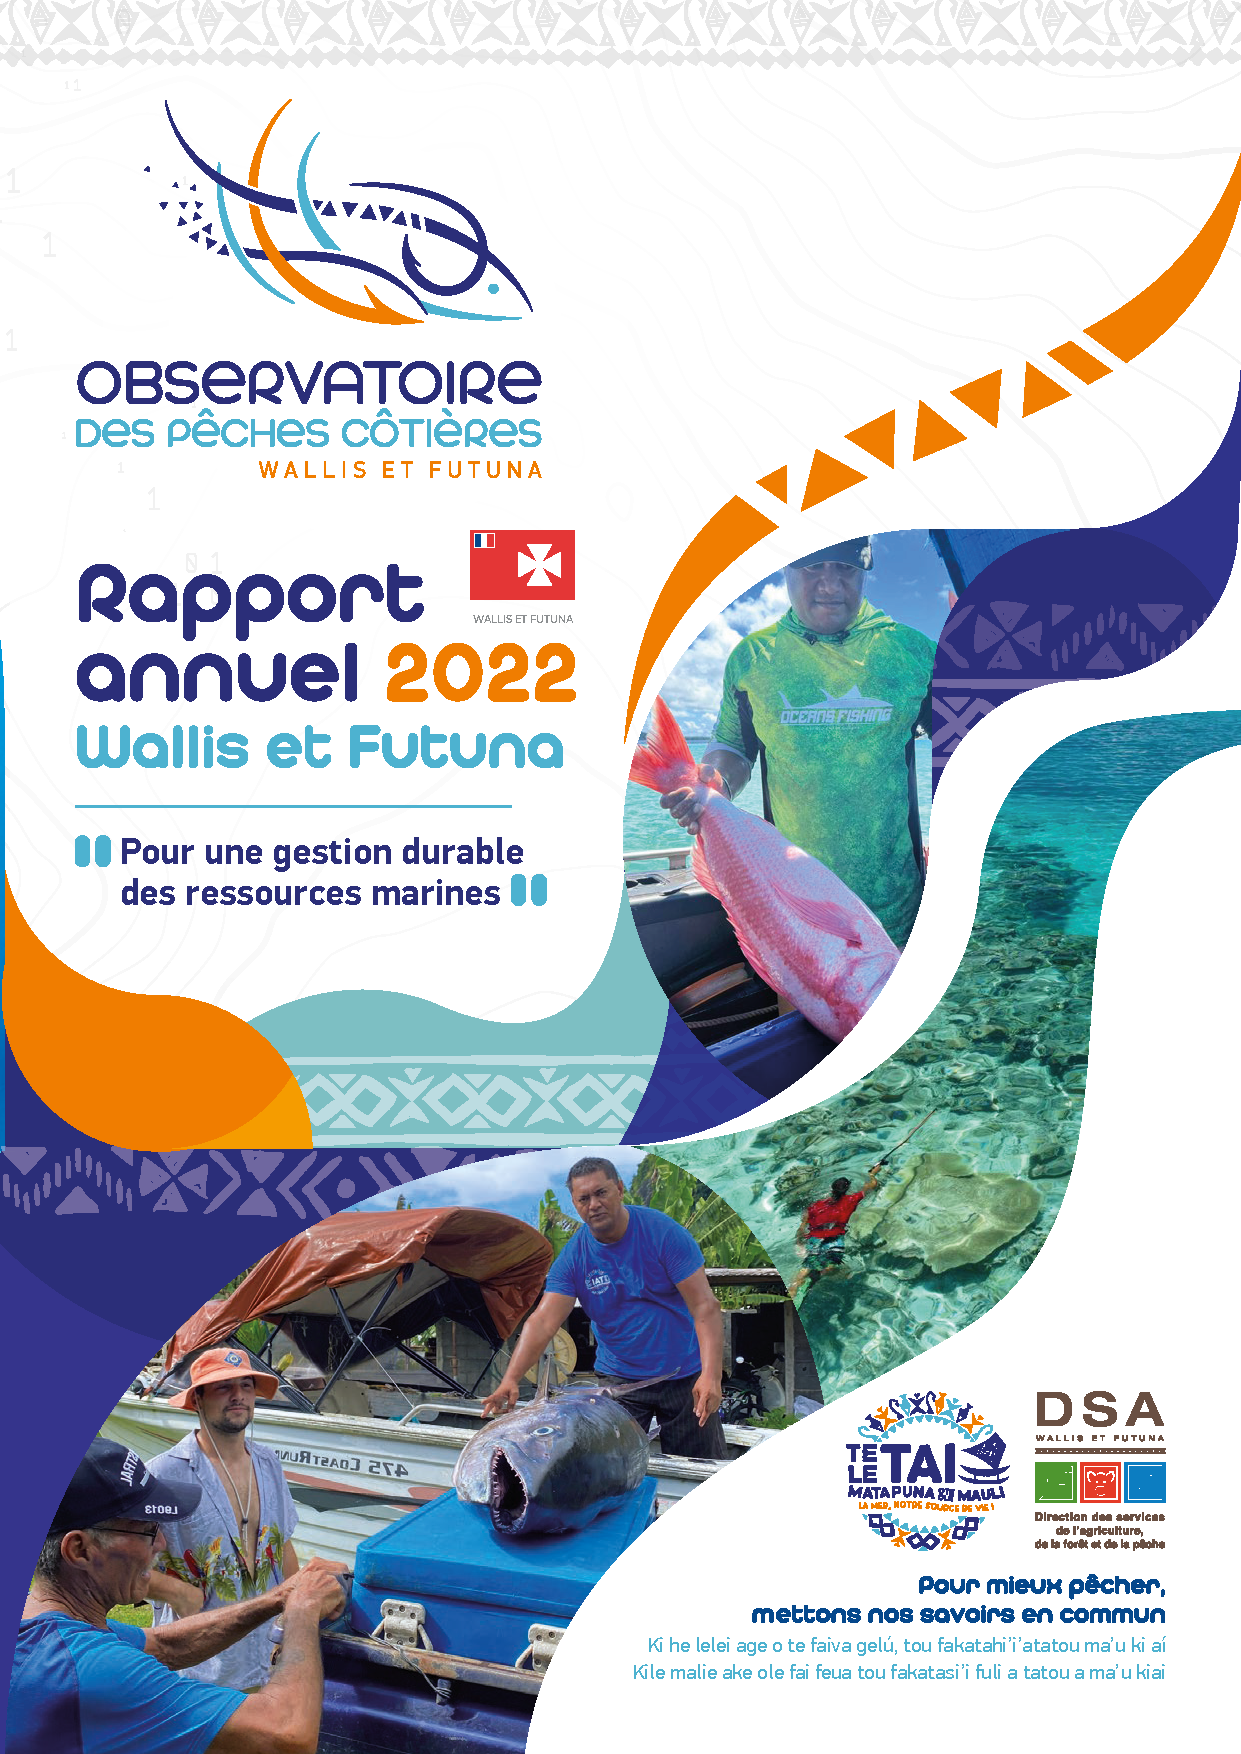 To view the Annual Report 2022 of the Coastal Fisheries Observatory of Wallis and Futuna - DSA - PROTEGE Project